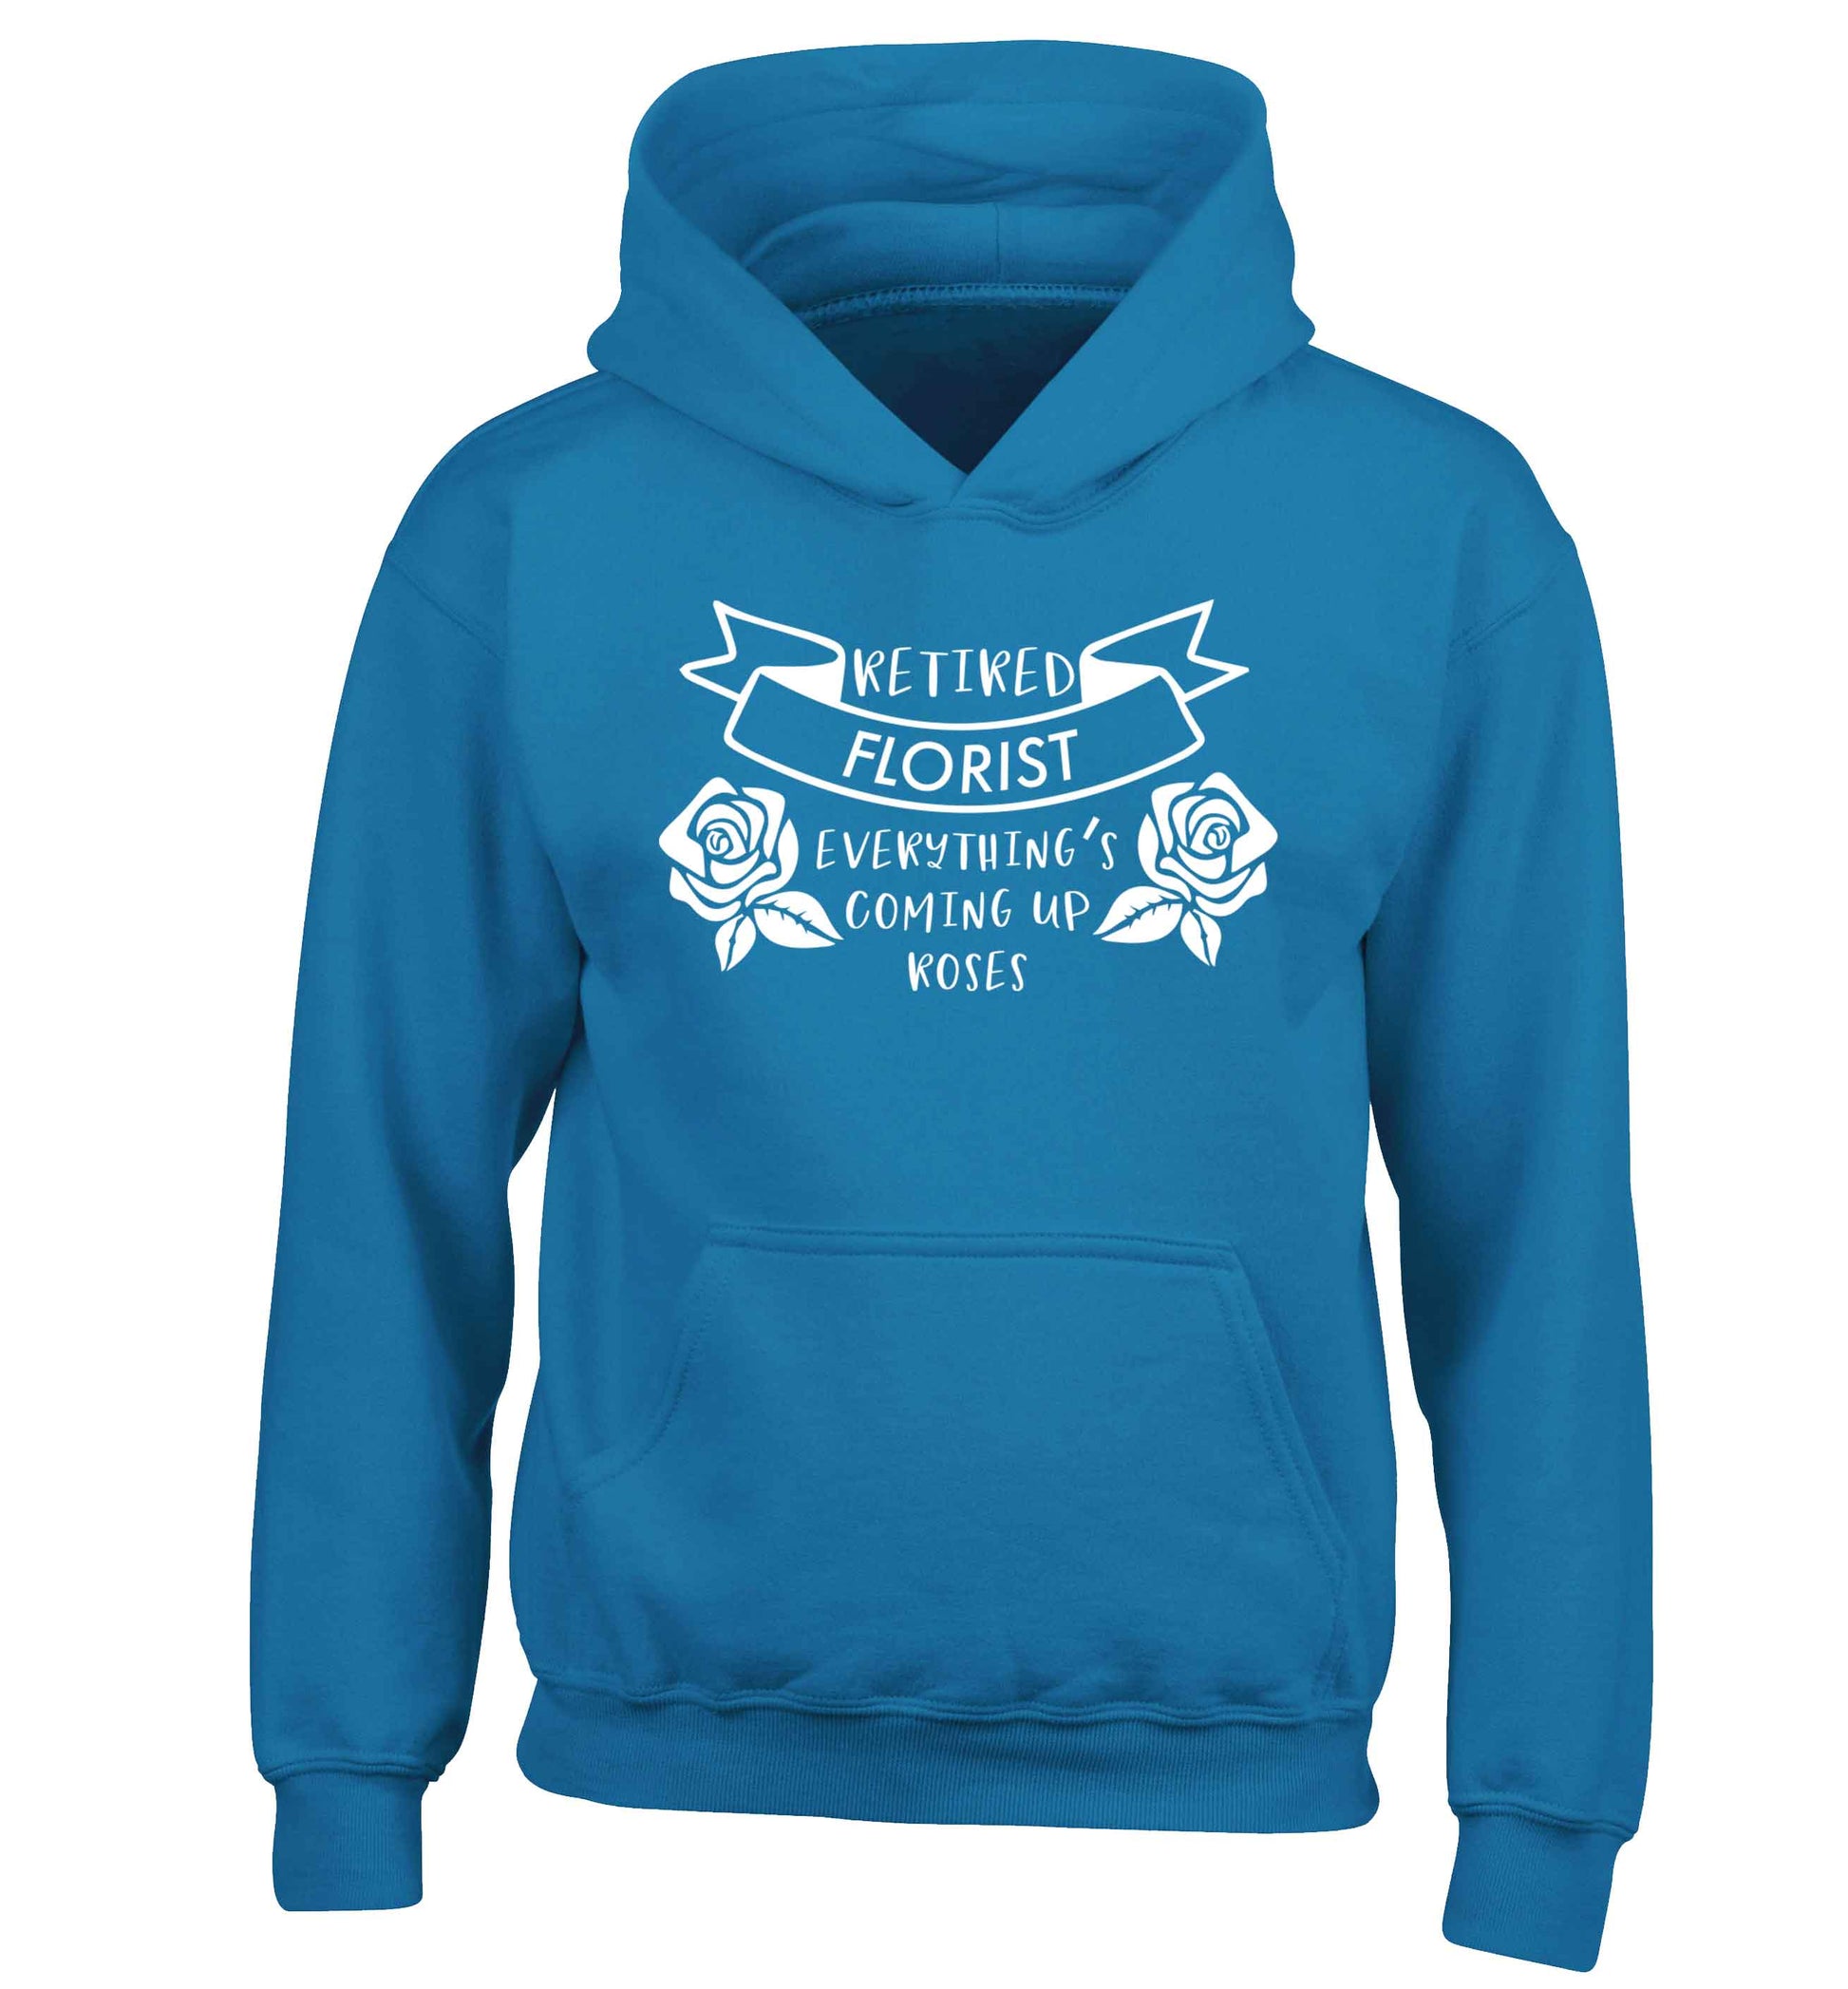 Retired florist everything's coming up roses children's blue hoodie 12-13 Years